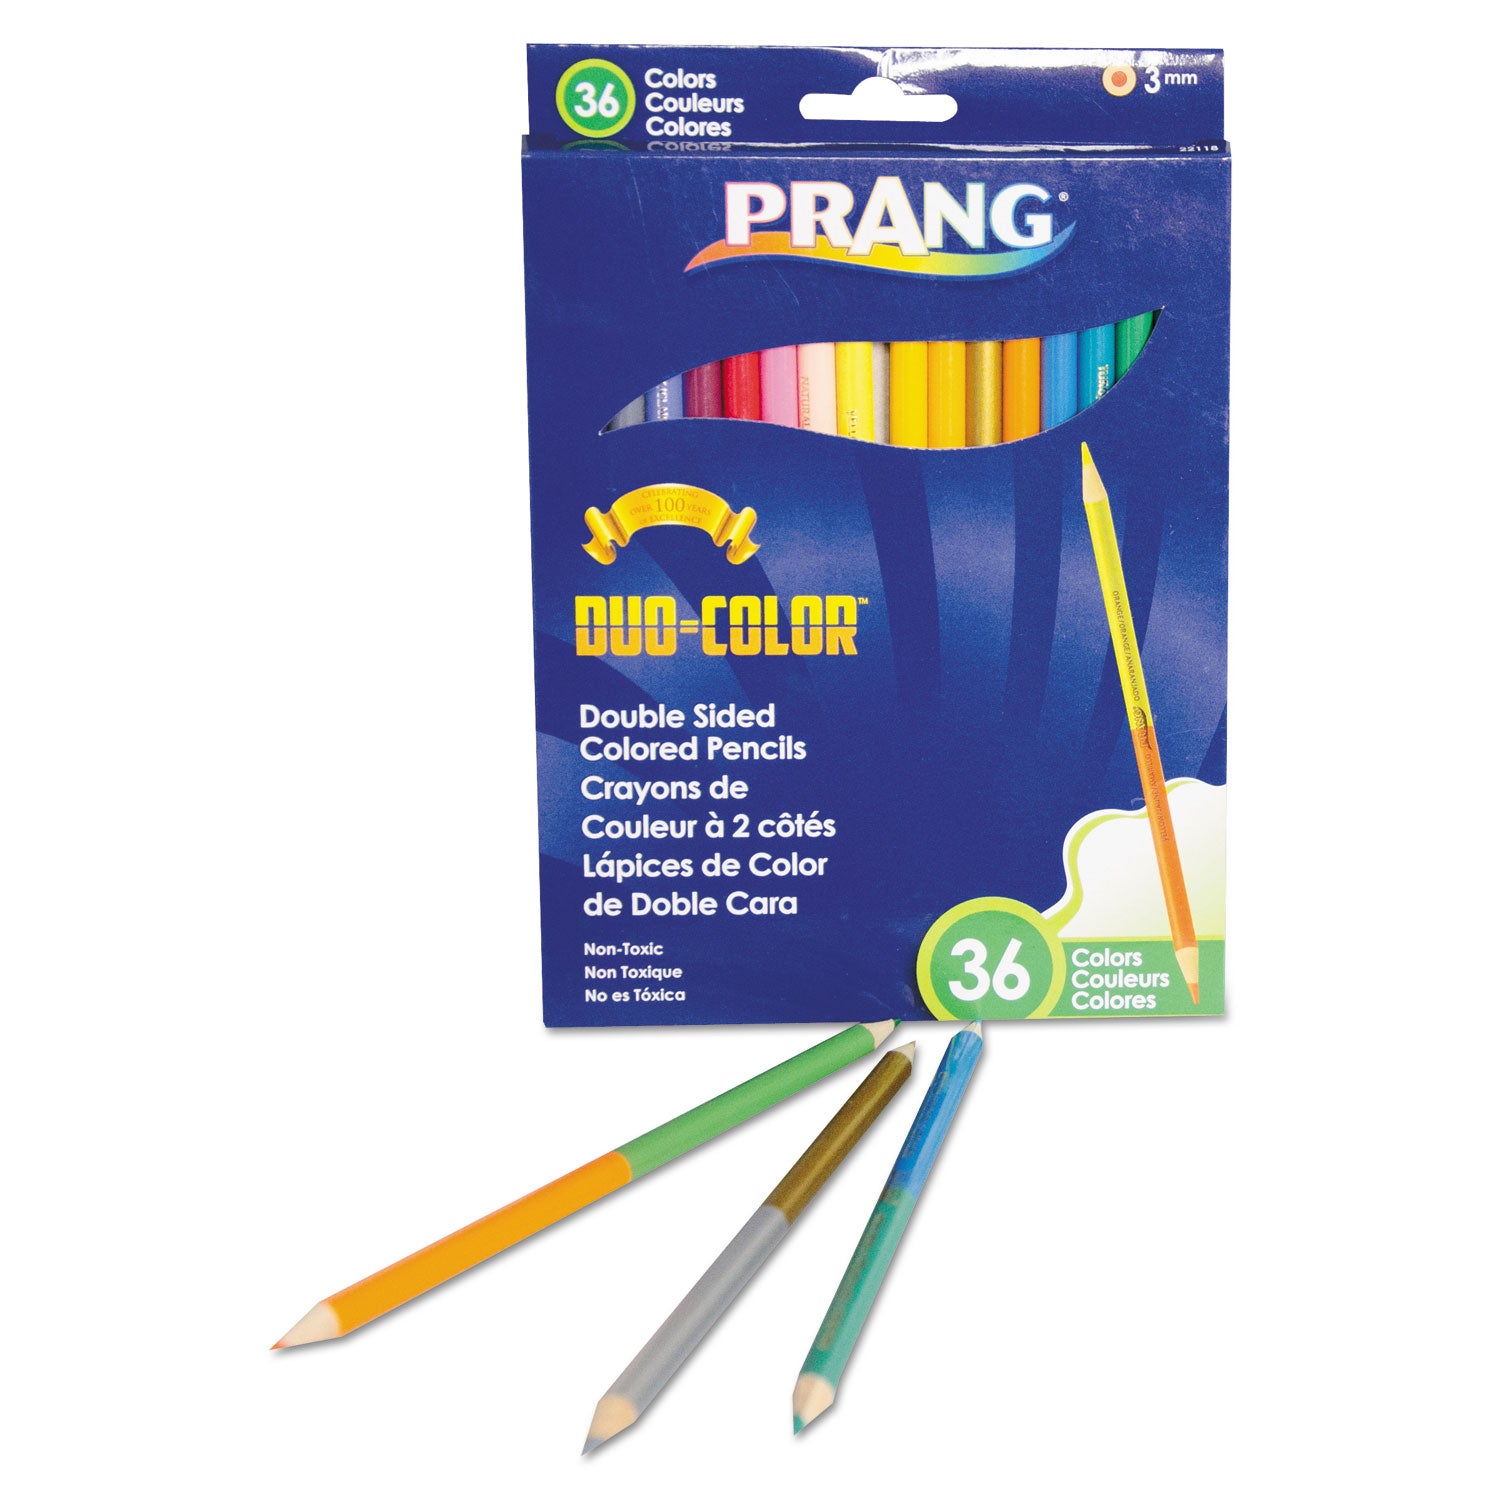 duo-color-colored-pencil-sets-3-mm-2b-assorted-lead-and-barrel-colors-18-pack_dix22118 - 2